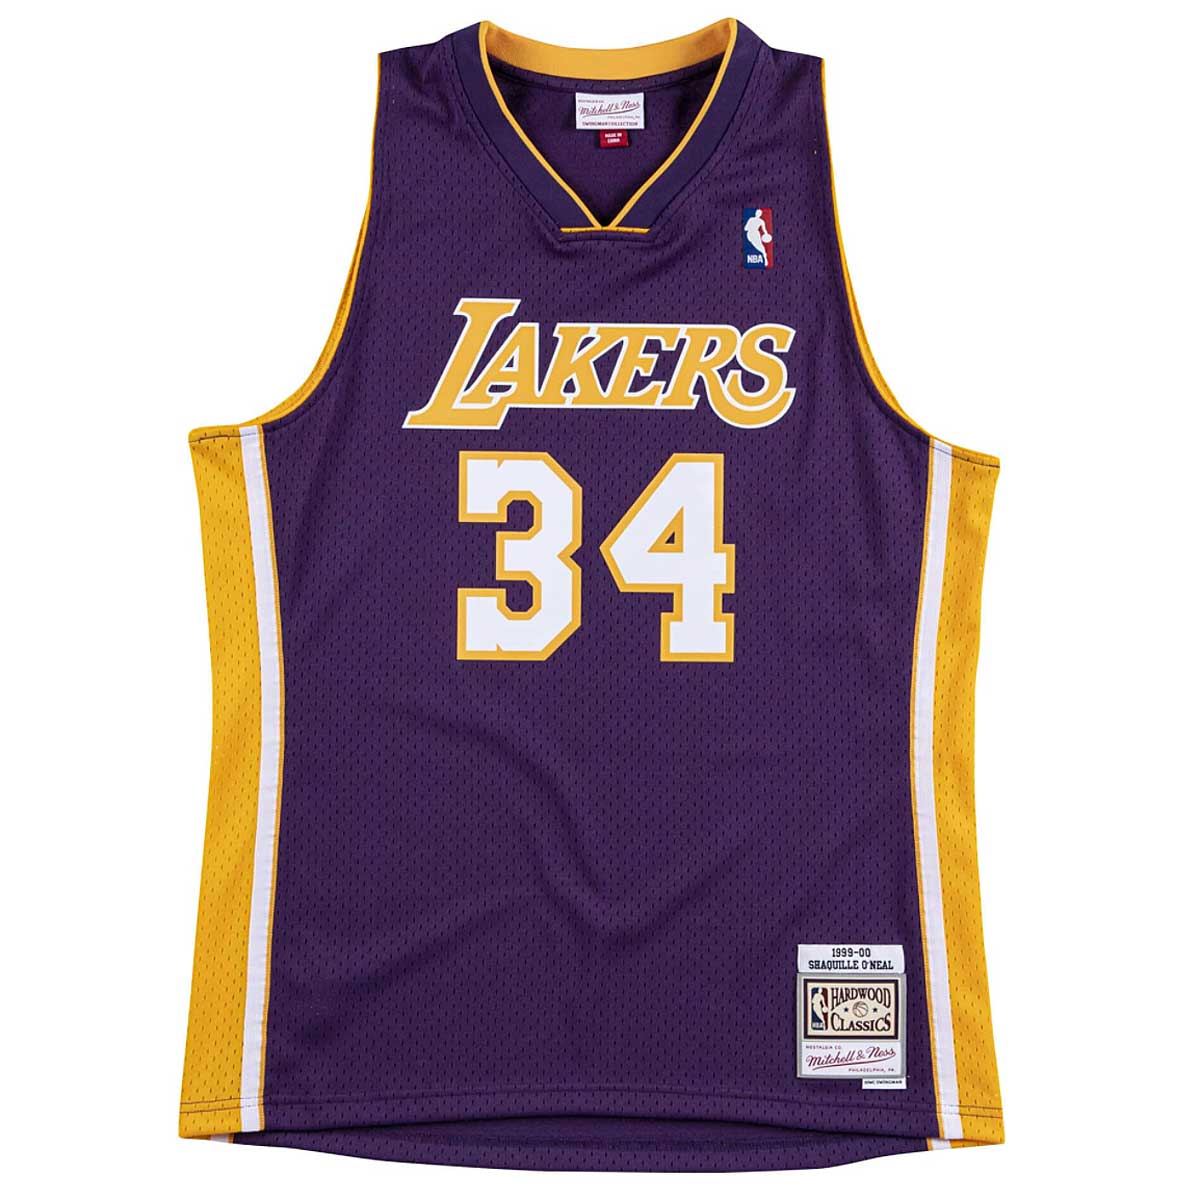 Image of Mitchell And Ness NBA Los Angeles Lakers Swingman Jersey 1999-00 Shaquille O'neal, Purple